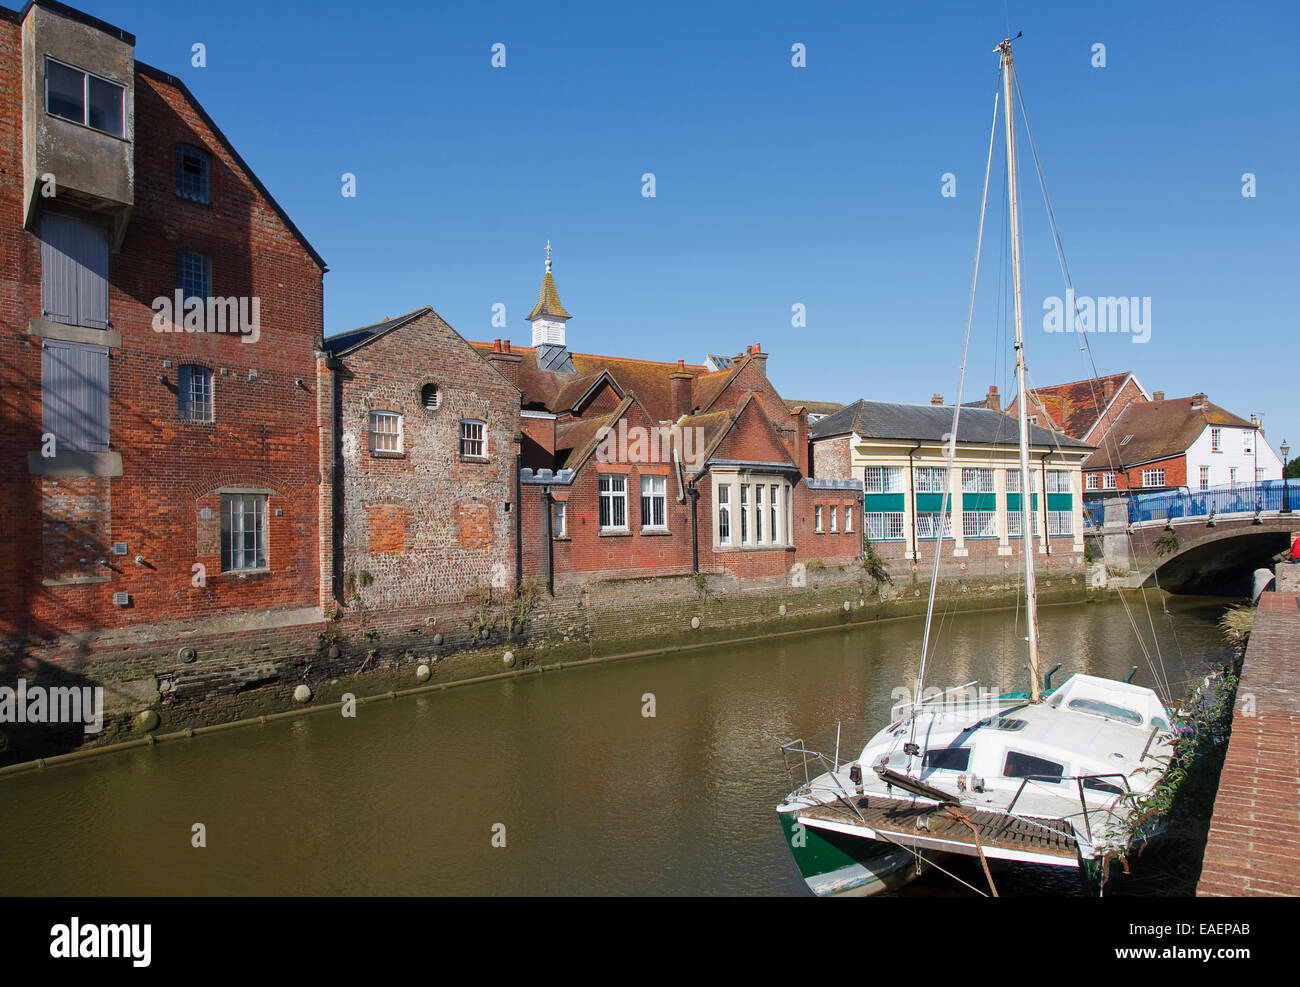 Waterfront warehouse and commercial buildings on the River Ouse in Lewes, East Sussex, UK Stock Photo